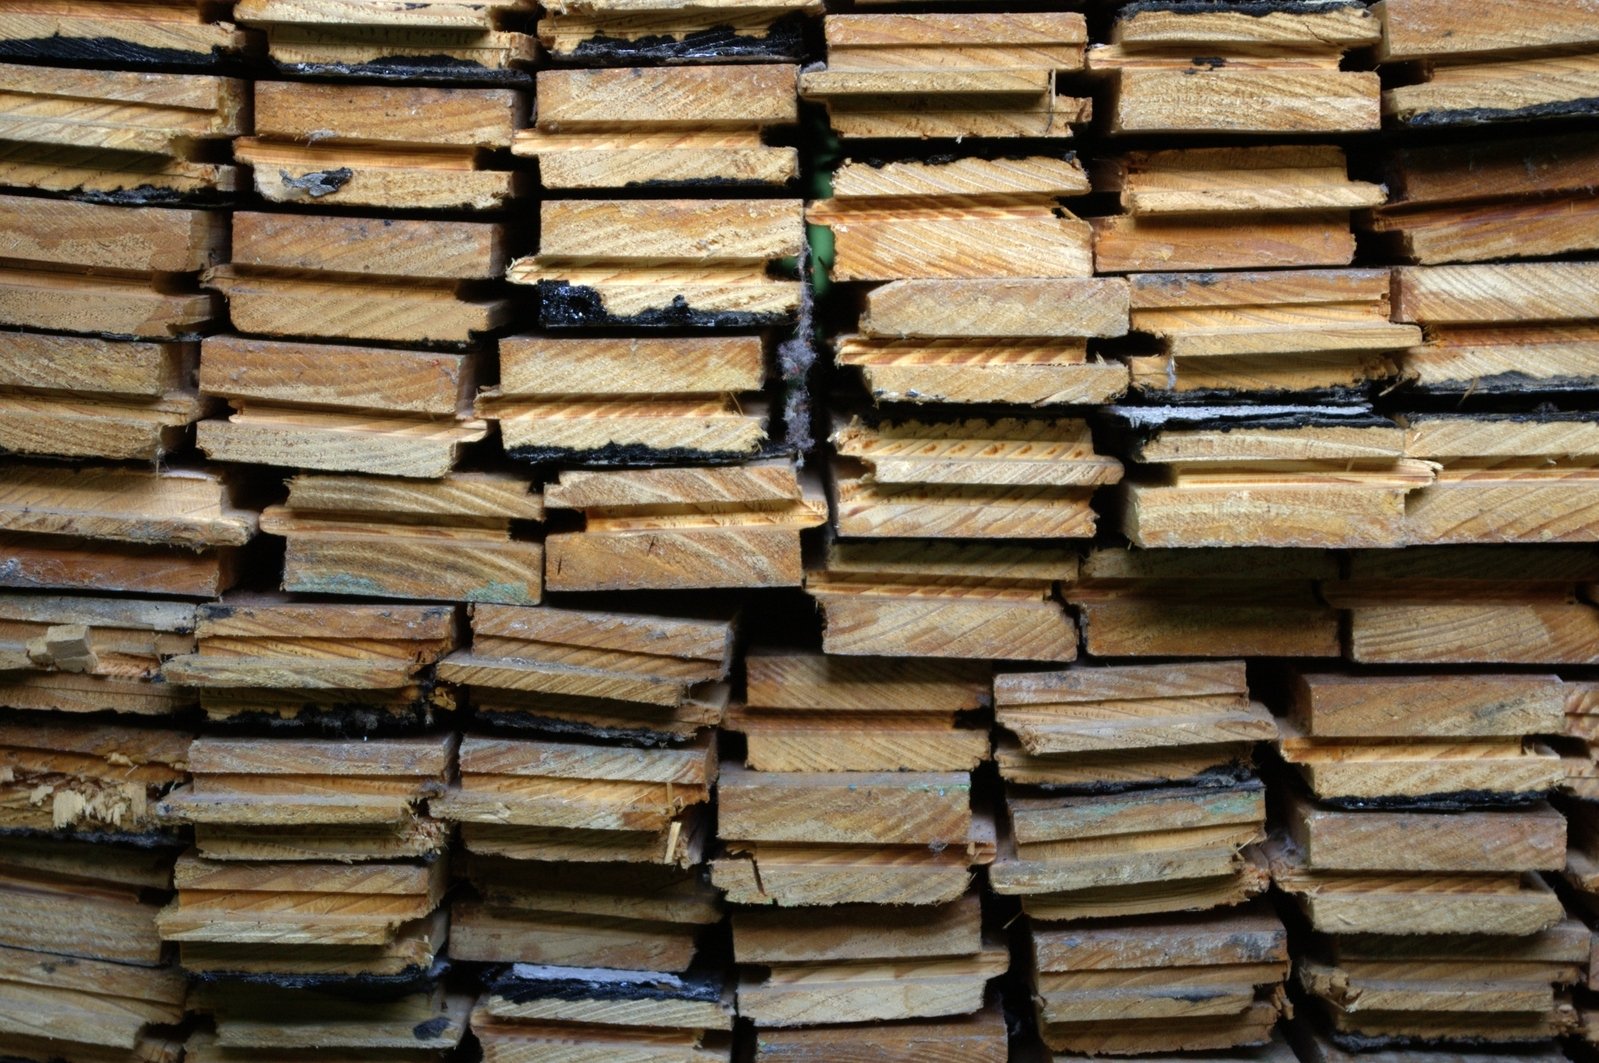 a large pile of wood is piled up